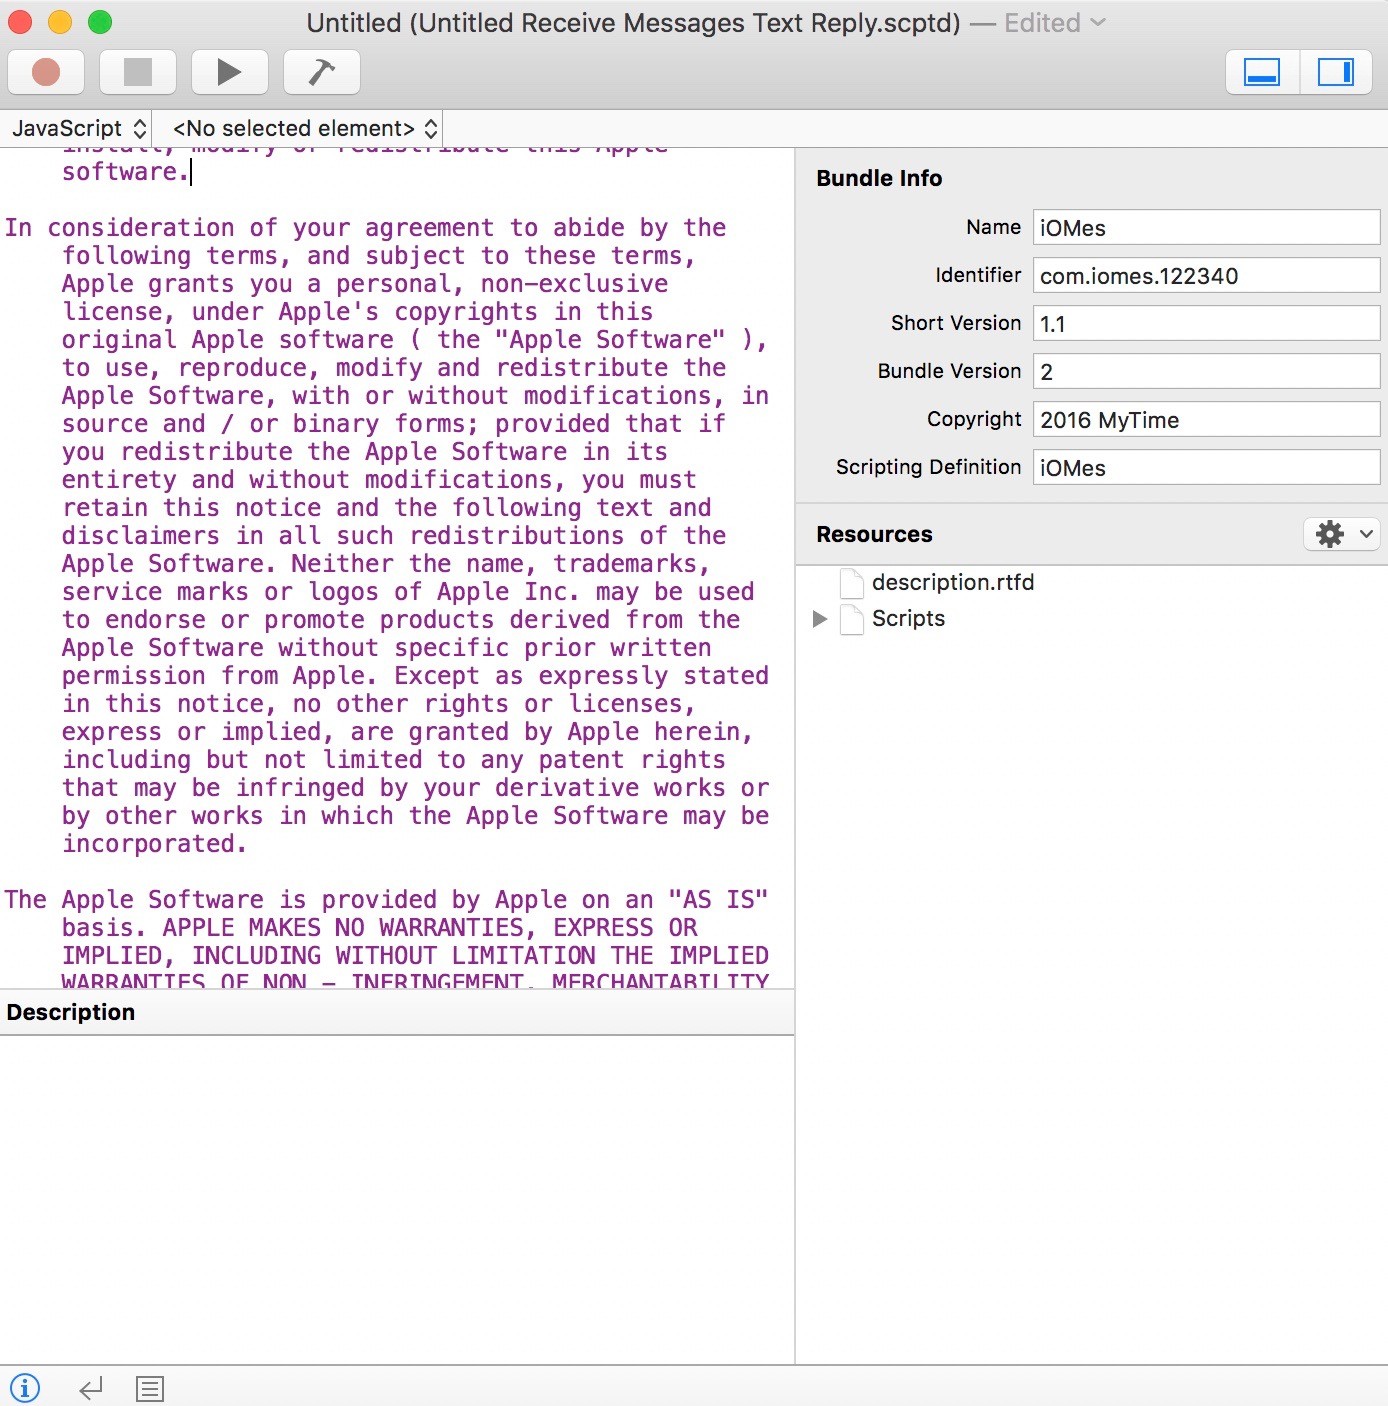 Auto Wrapping Text At 65 Characters In Word 98 For Mac